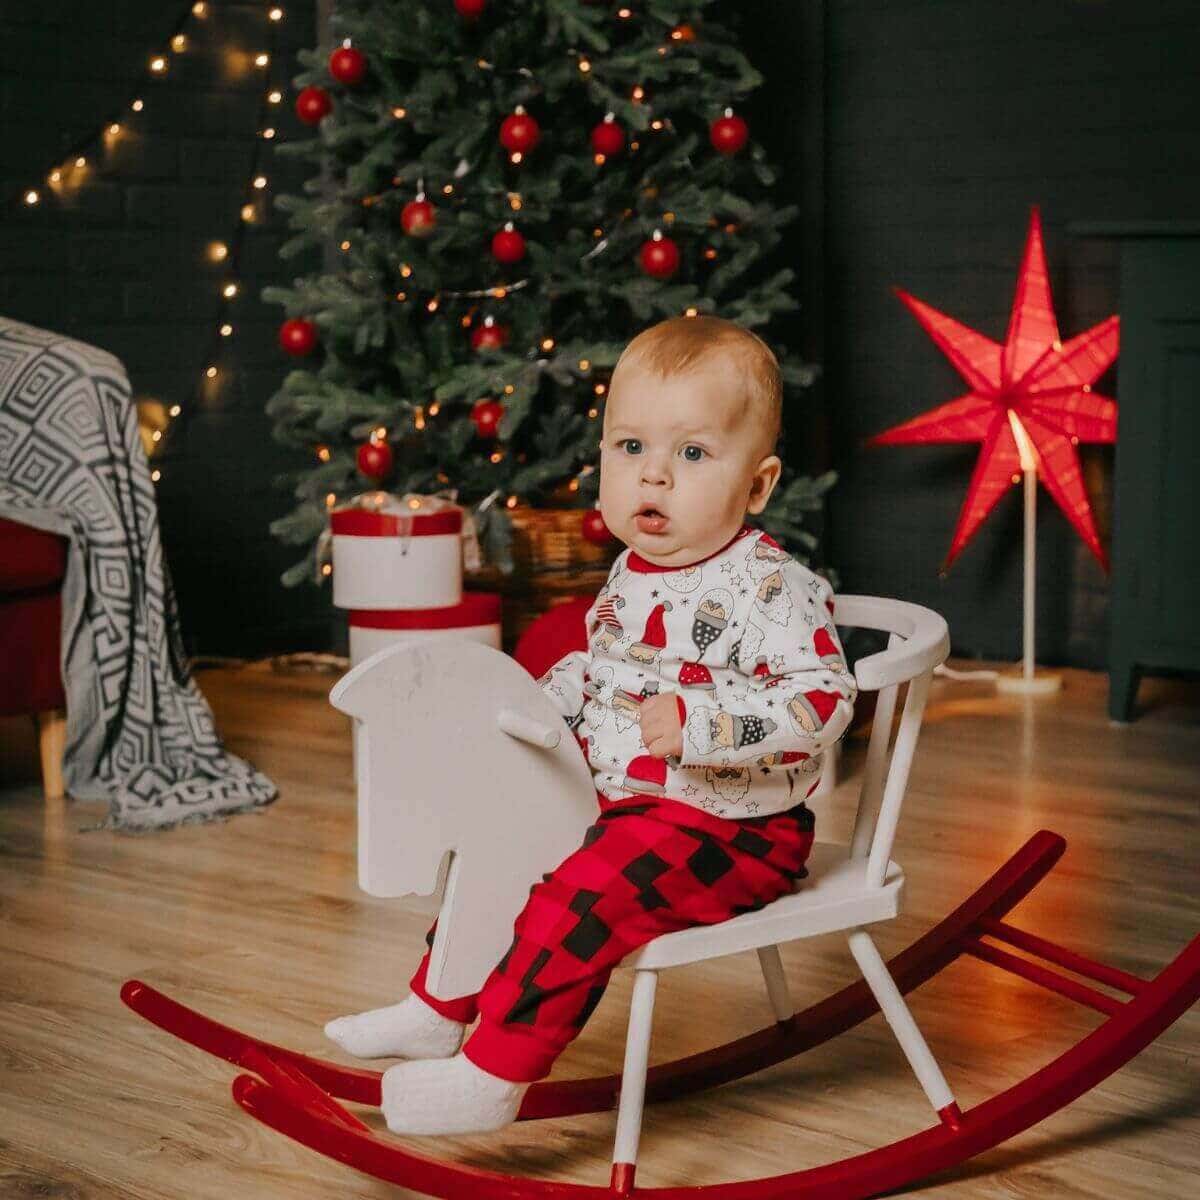 A baby is sitting in a white and red rocking chair in front of a lit up Christmas tree.